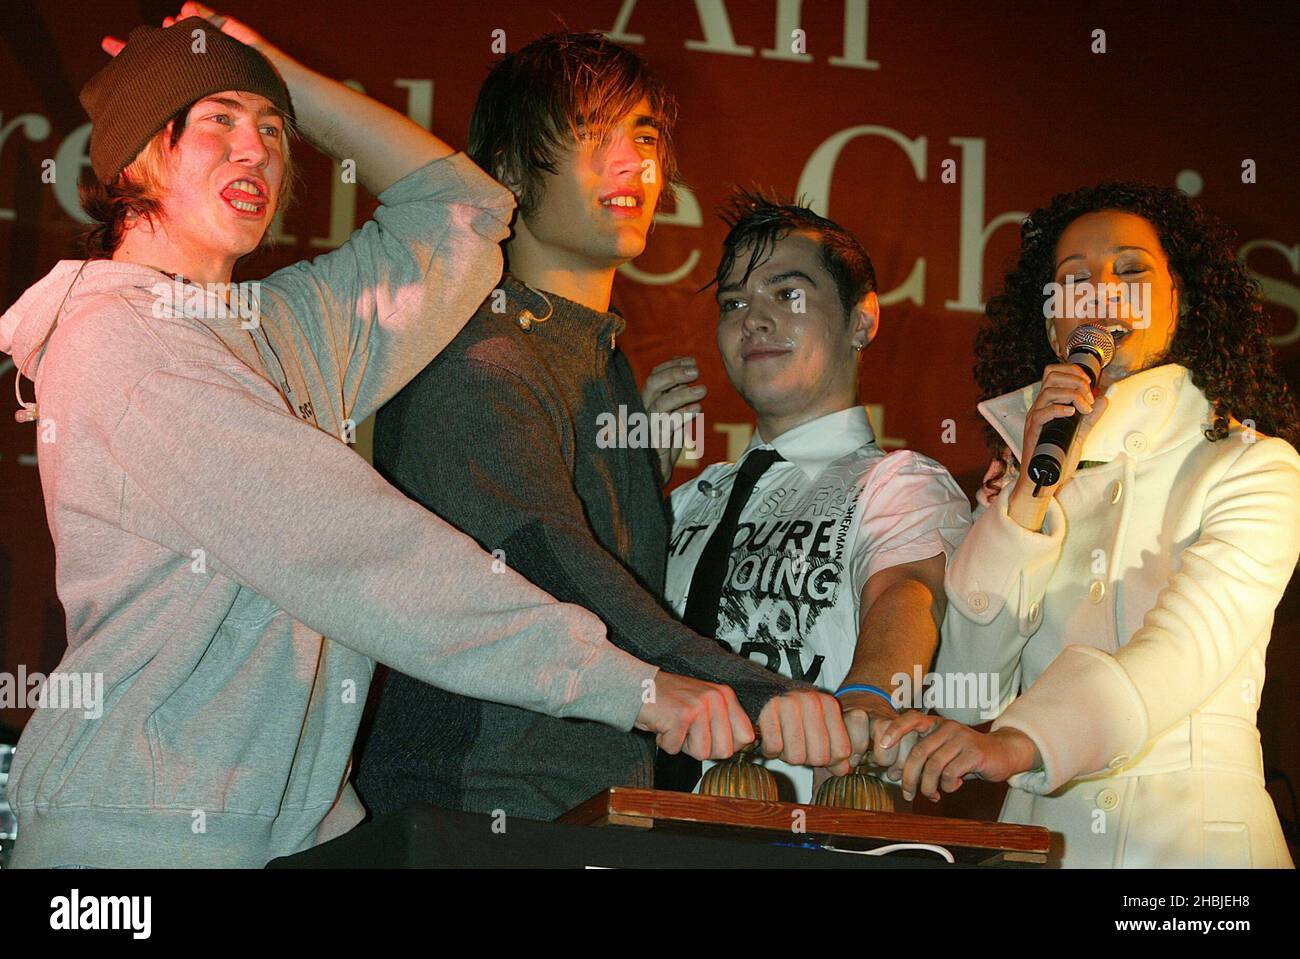 Busted James Bourne; Charlie Simpson; Matt Willis and Margerita Taylor attends the annual Regent Street Christmas Lights switching-on ceremony, having performed live, in Regent Street on November 7, 2004 in London. Stock Photo